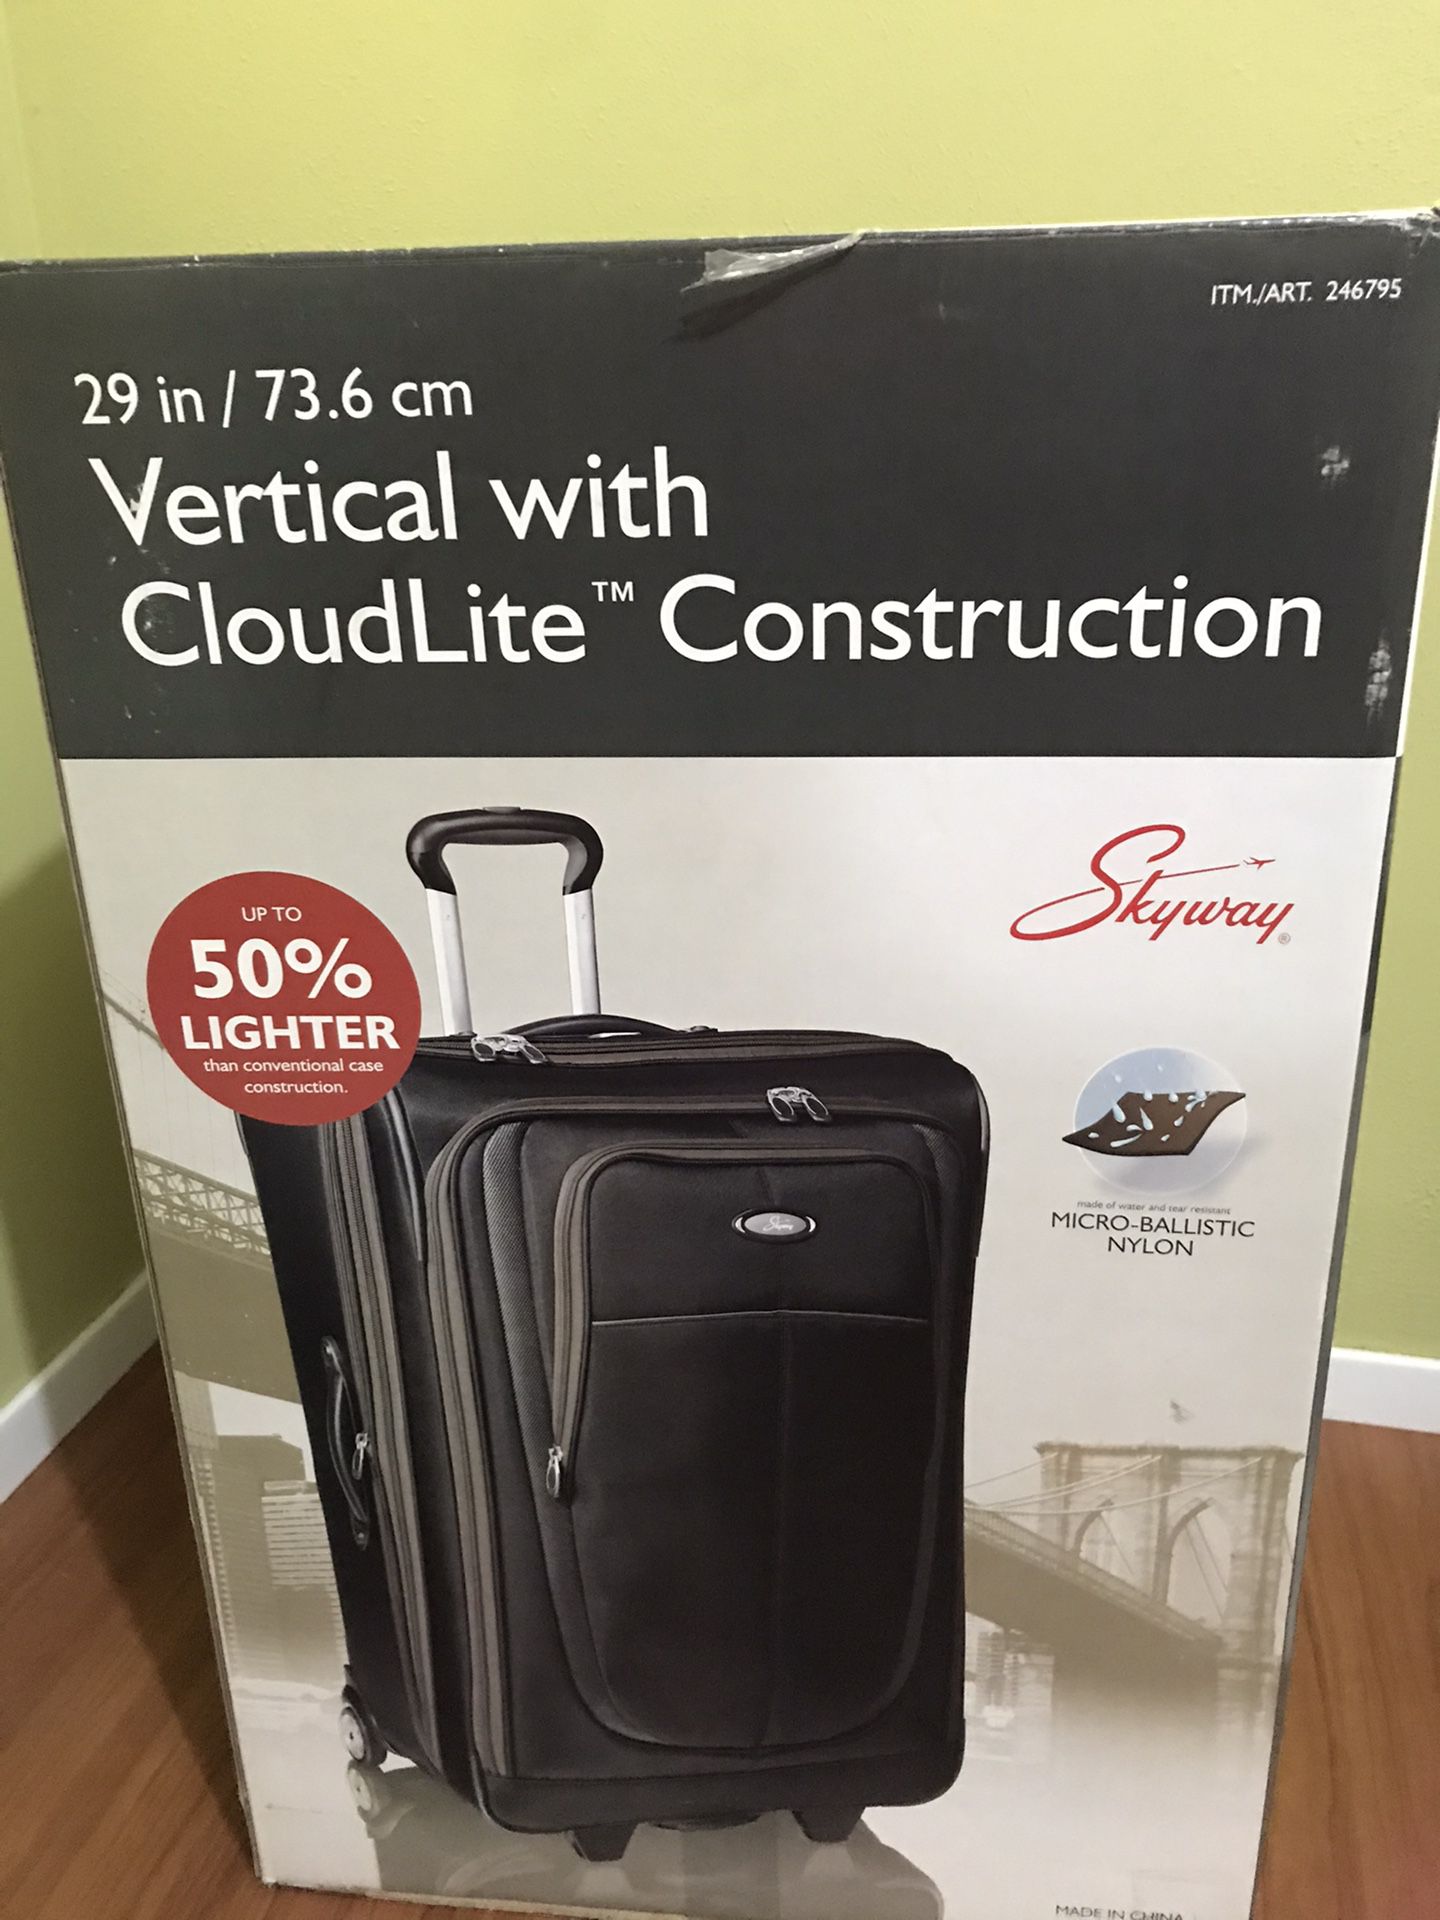 Vertical with Cloudlite Construction large Luggage